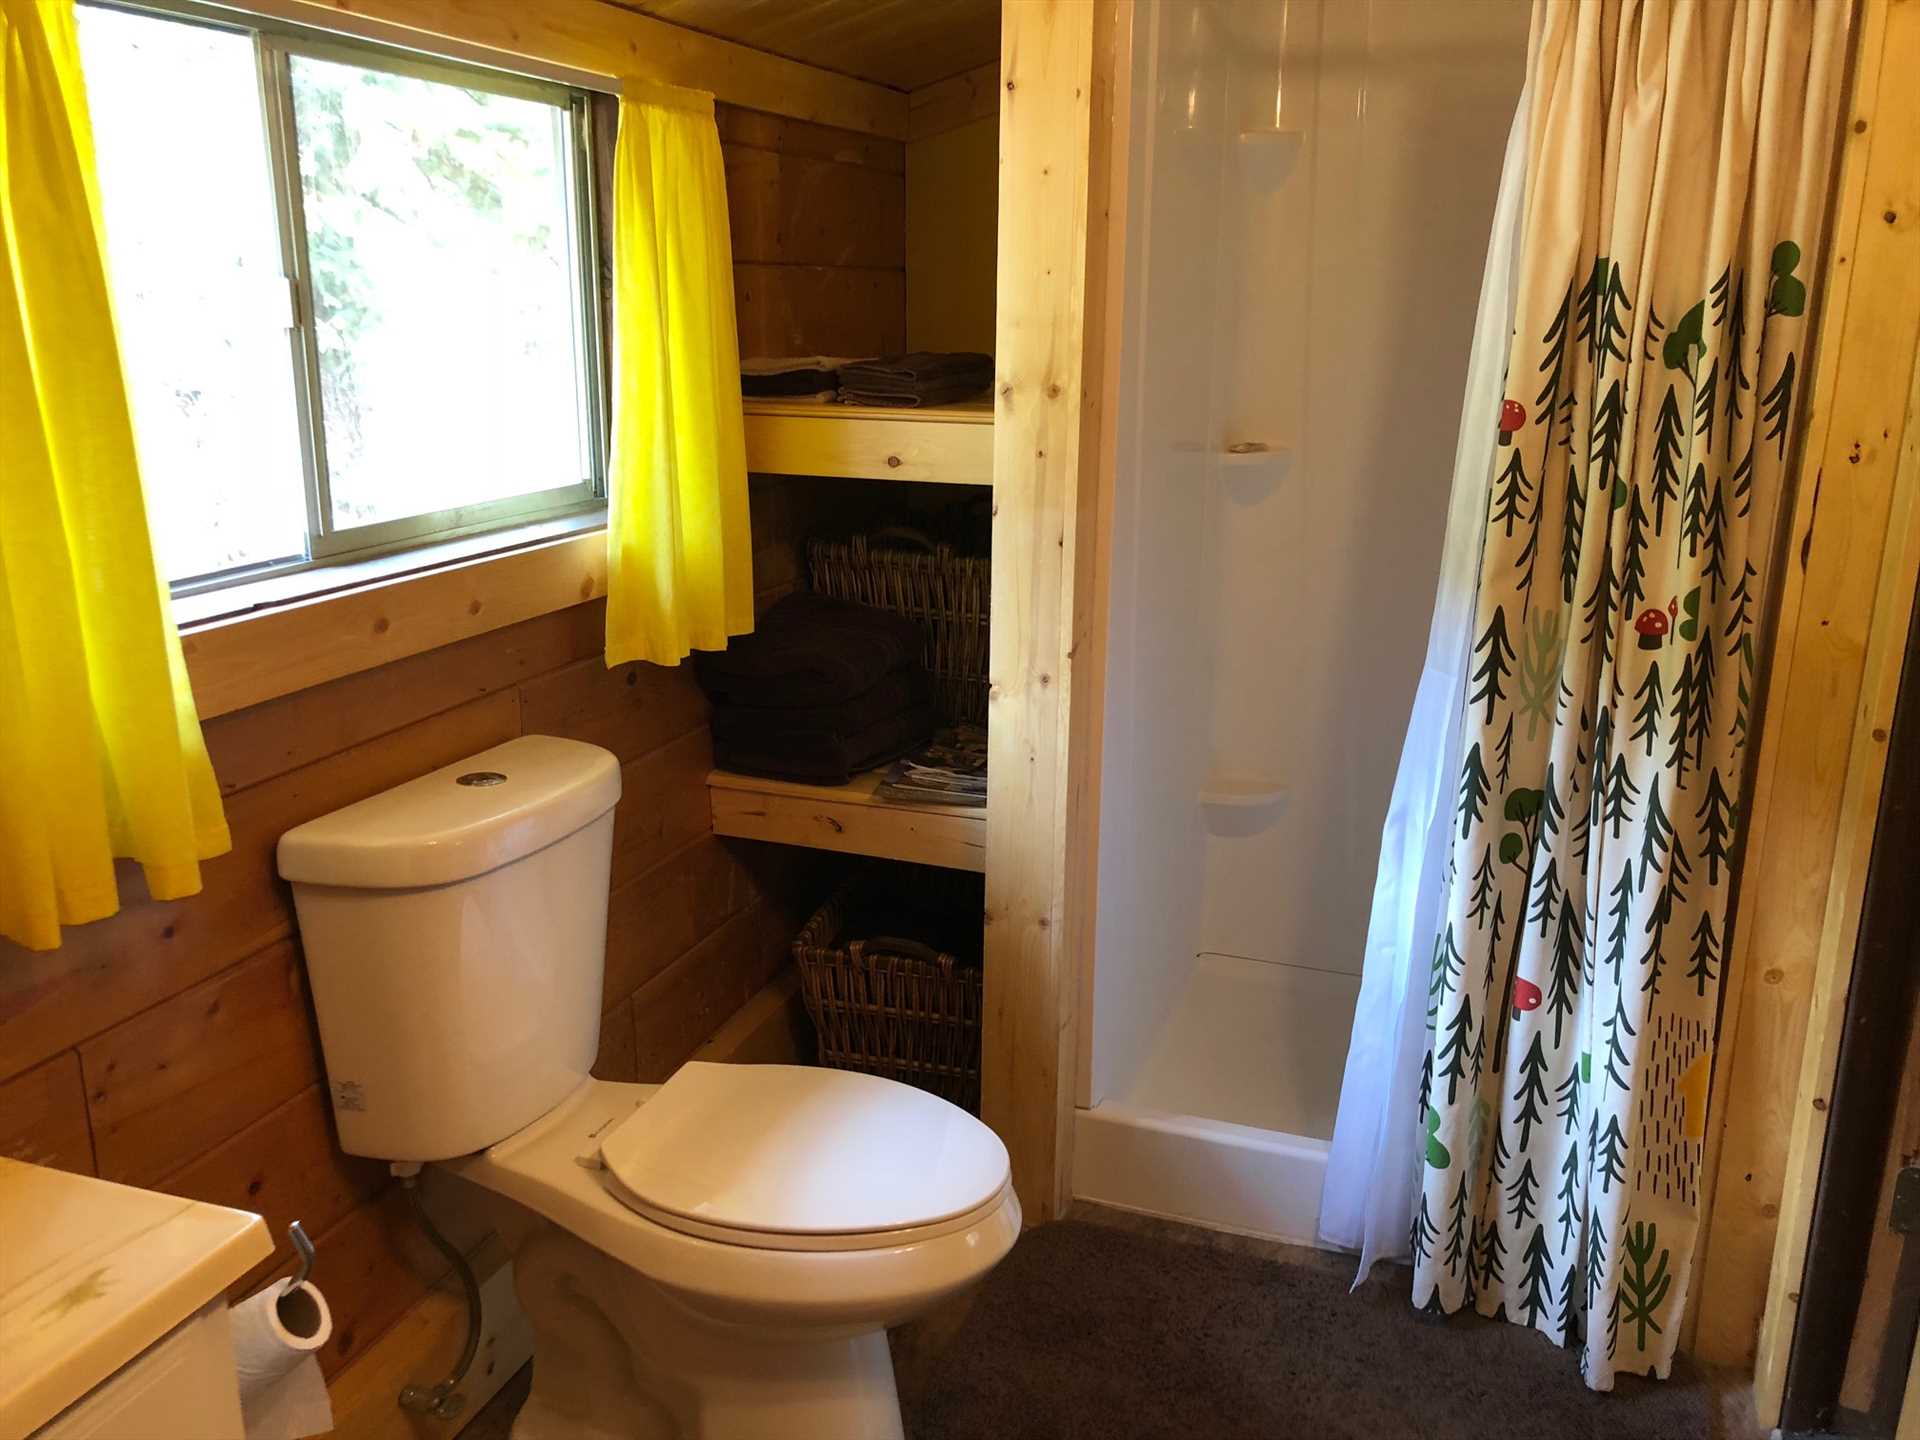 Newly Remodeled Bathroom with Shower